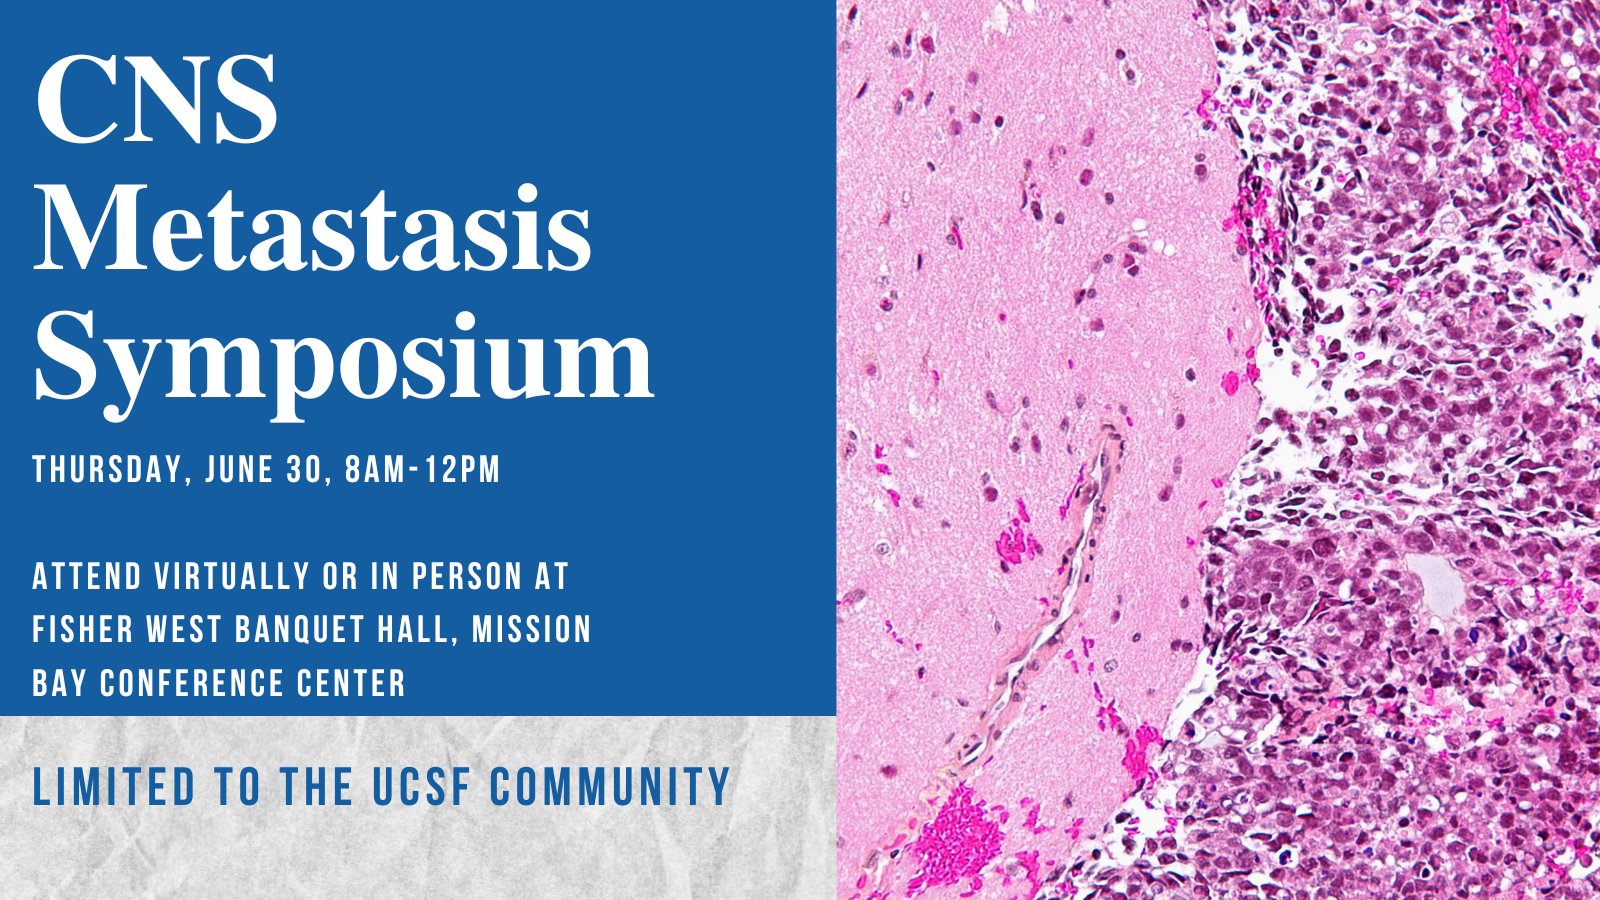 CNS Metastasis Symposium, Thursday, June 30, 8am-12pm, Attend virtually or in person at Fischer West Banquet Hall, Mission Bay Conference Center, Limited to the UCSF Community